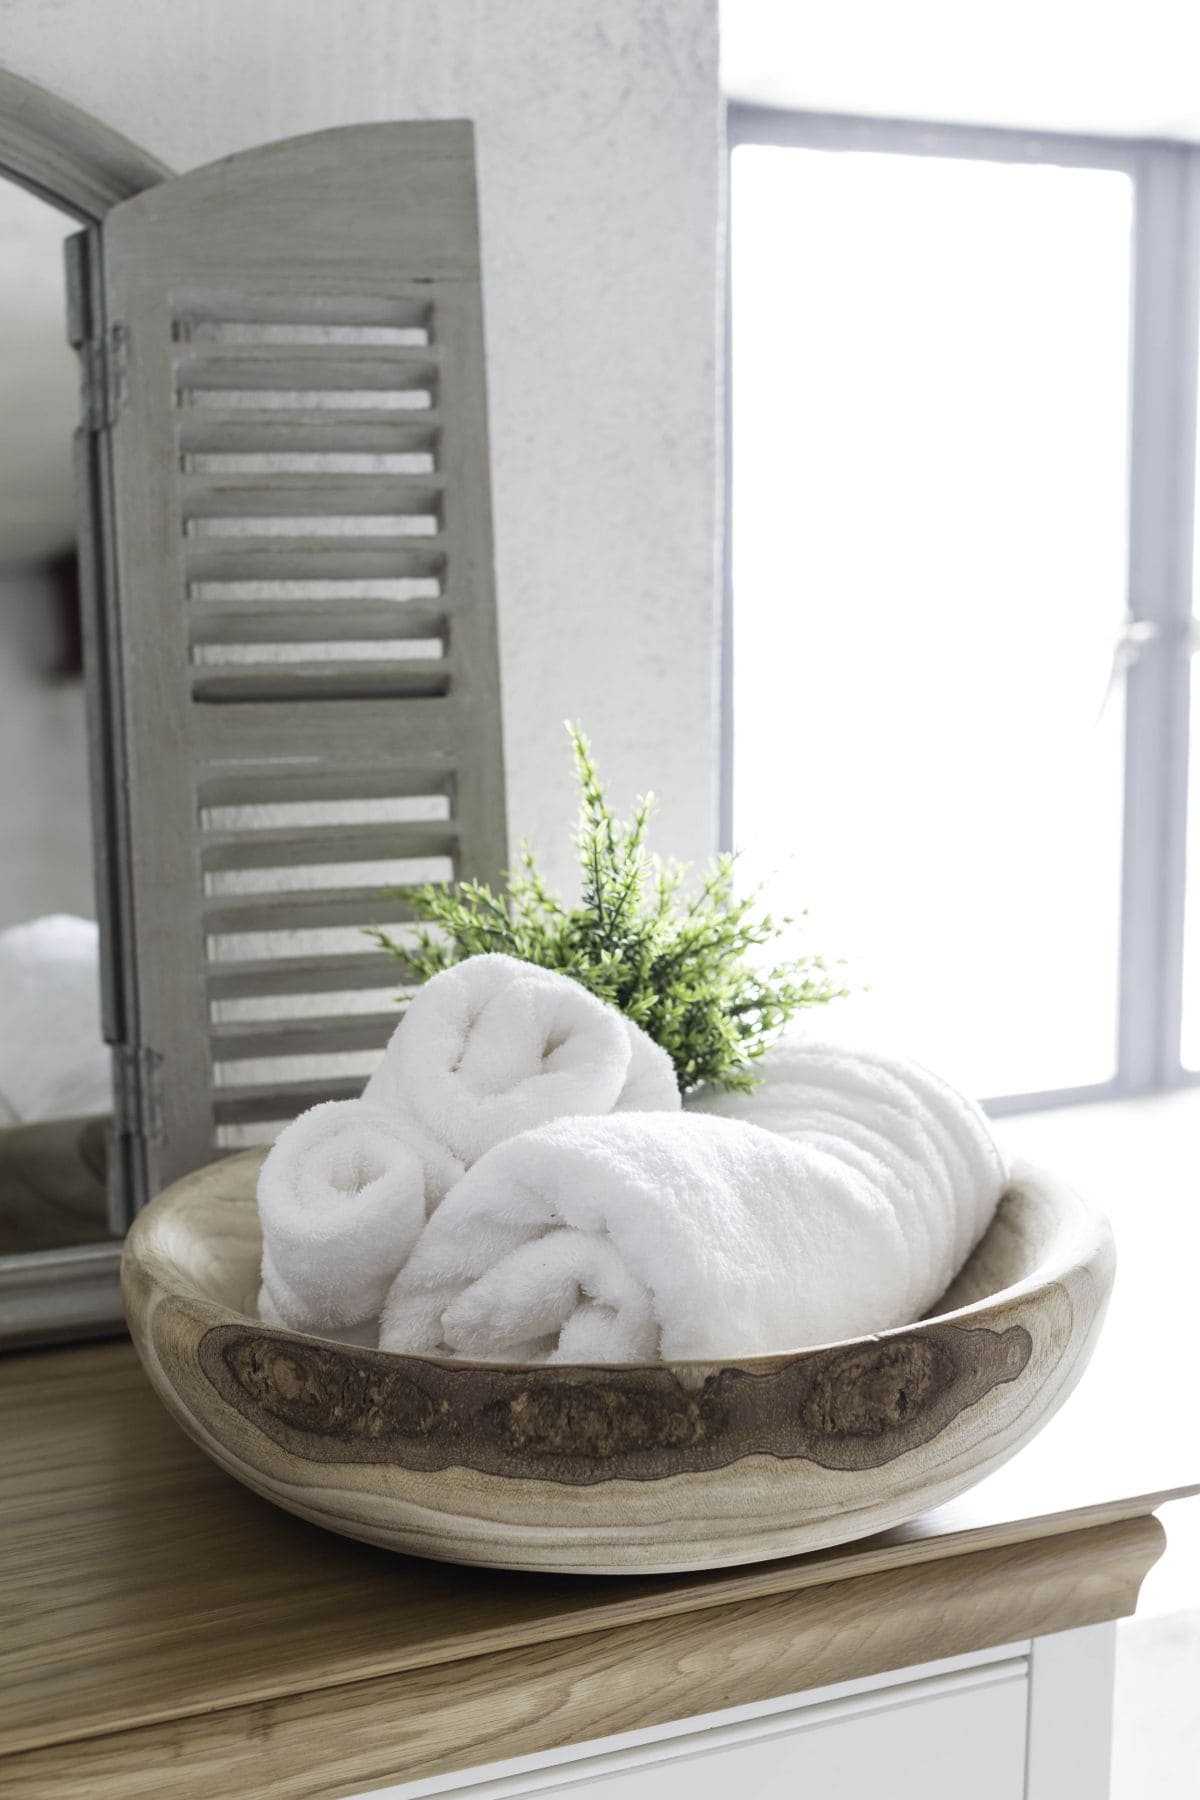 30 clever towel storage ideas for your bathroom - 73